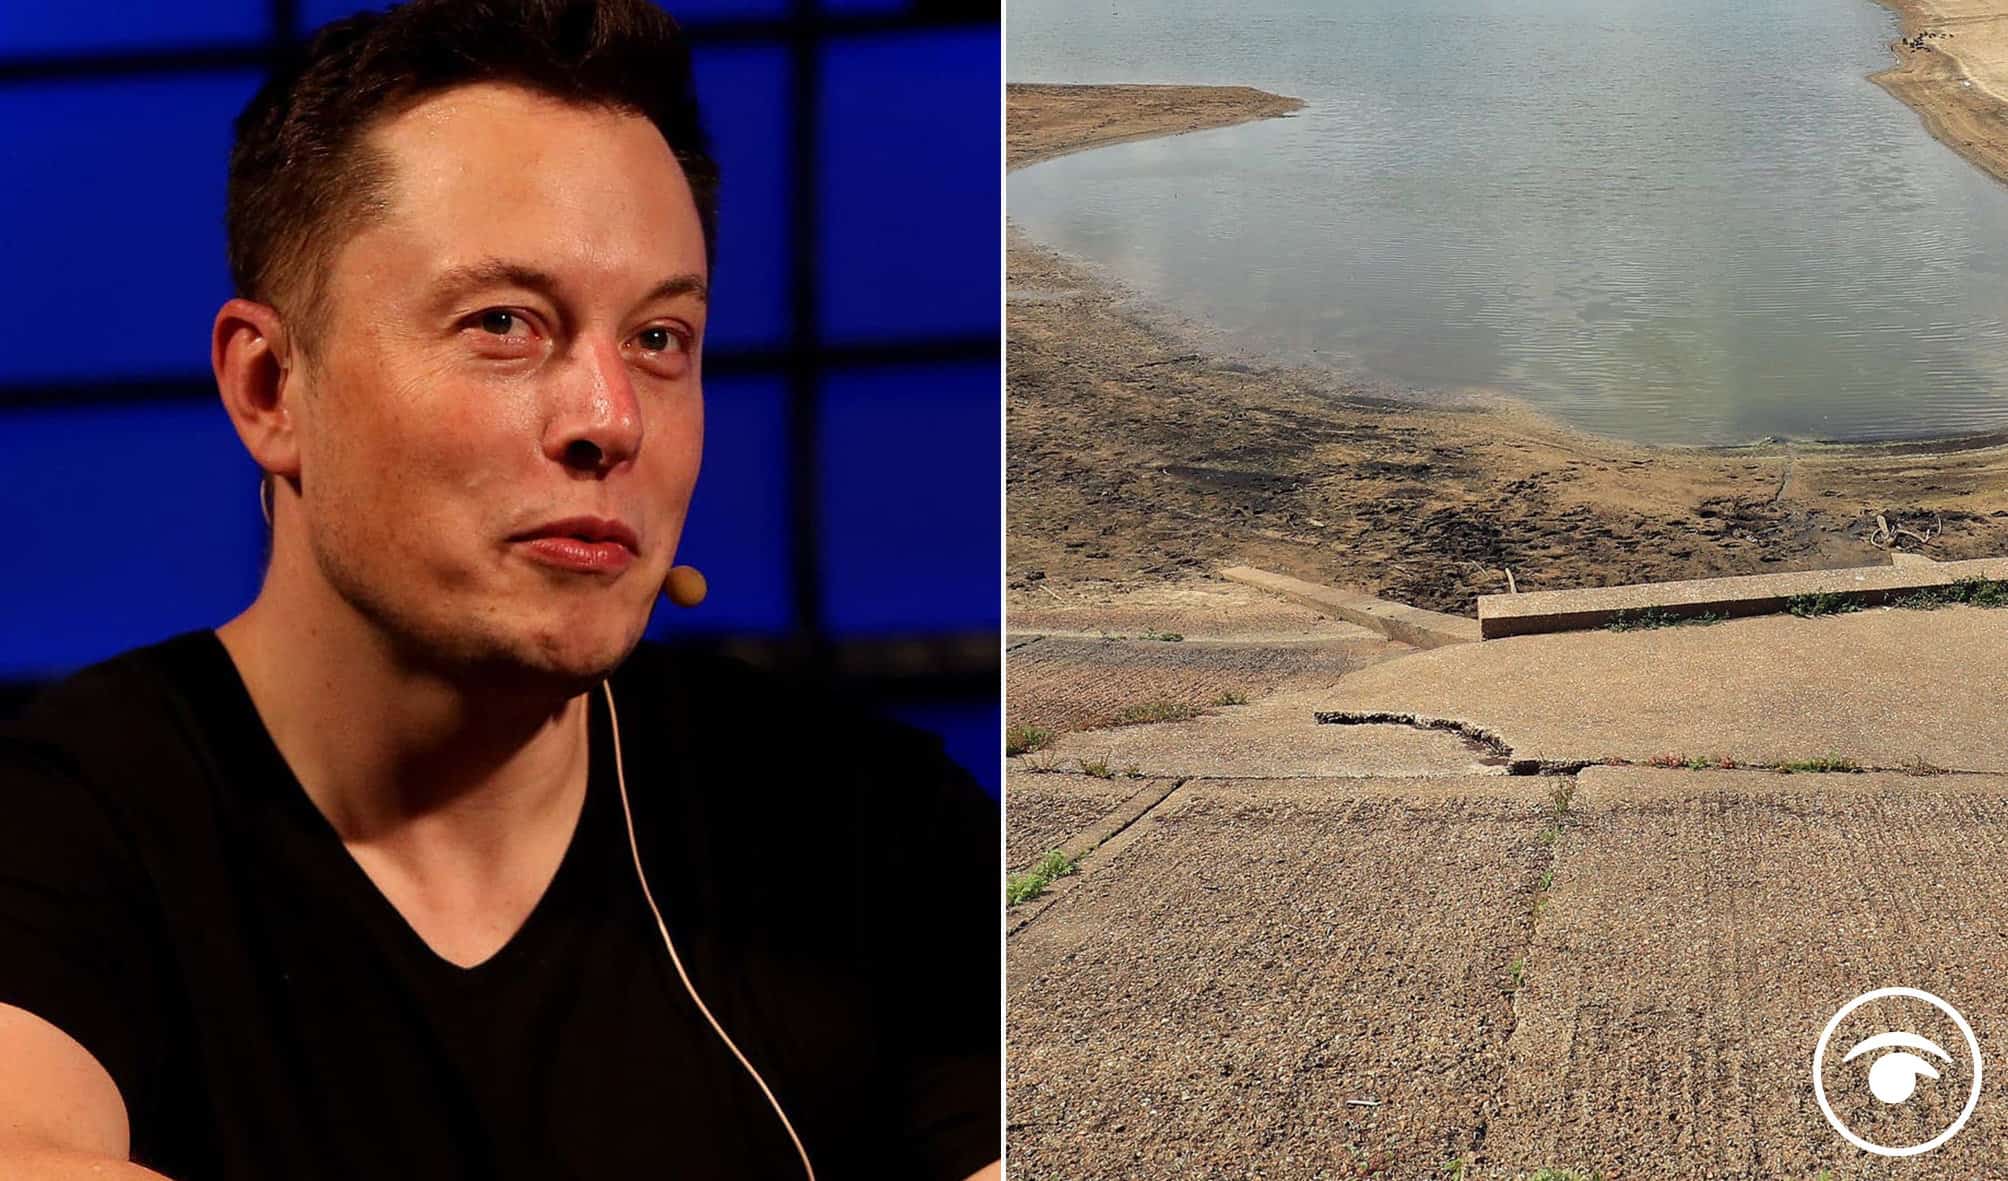 Elon Musk comments about population collapse and global warming ridiculed in two words